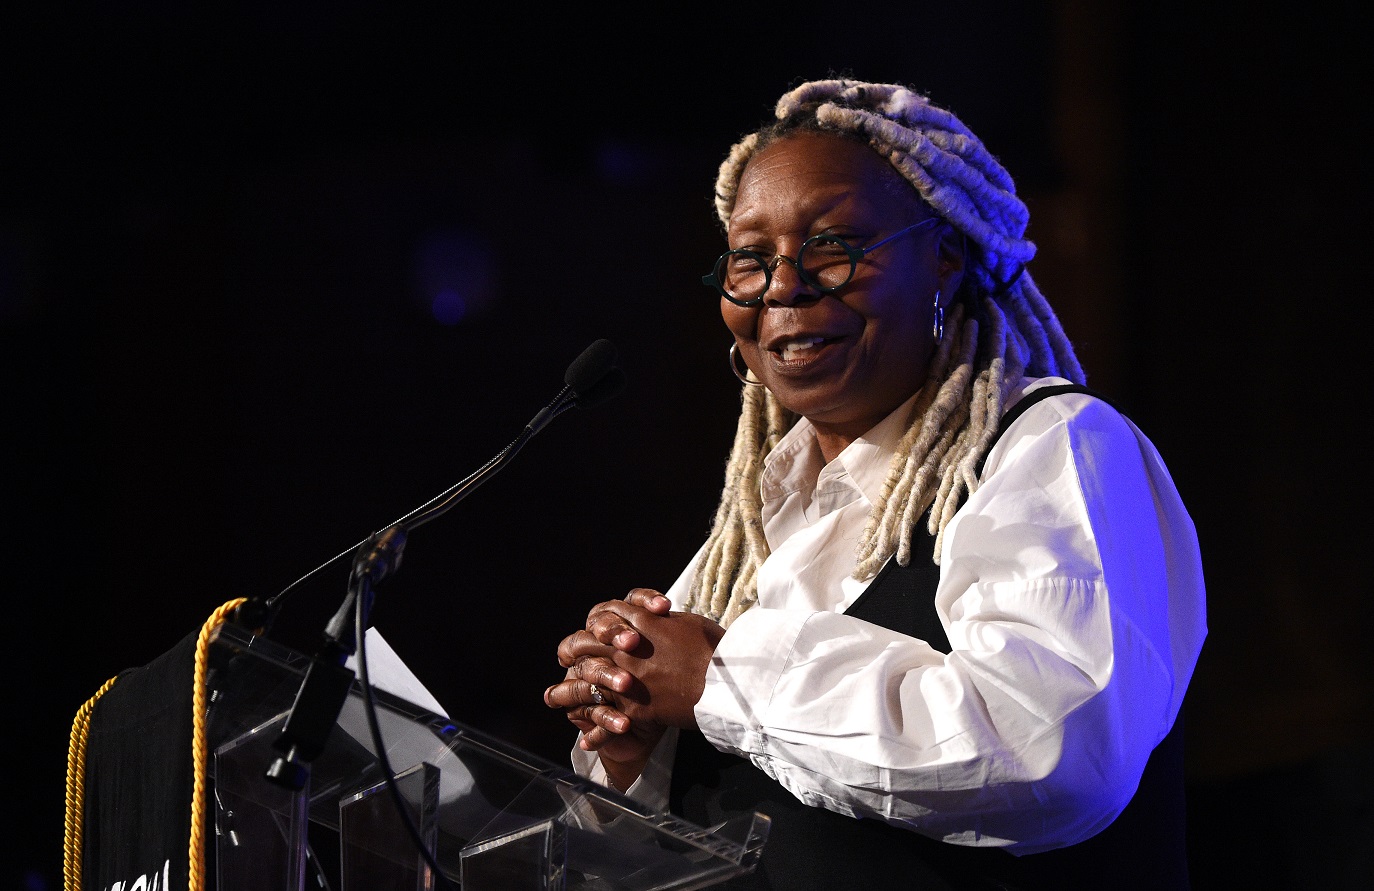  Whoopi Goldberg speaks onstage during The National Board of Review Annual Awards Gala at Cipriani 42nd Street on January 08, 2020 in New York City. (Photo by Kevin Mazur/Getty Images for National Board of Review)